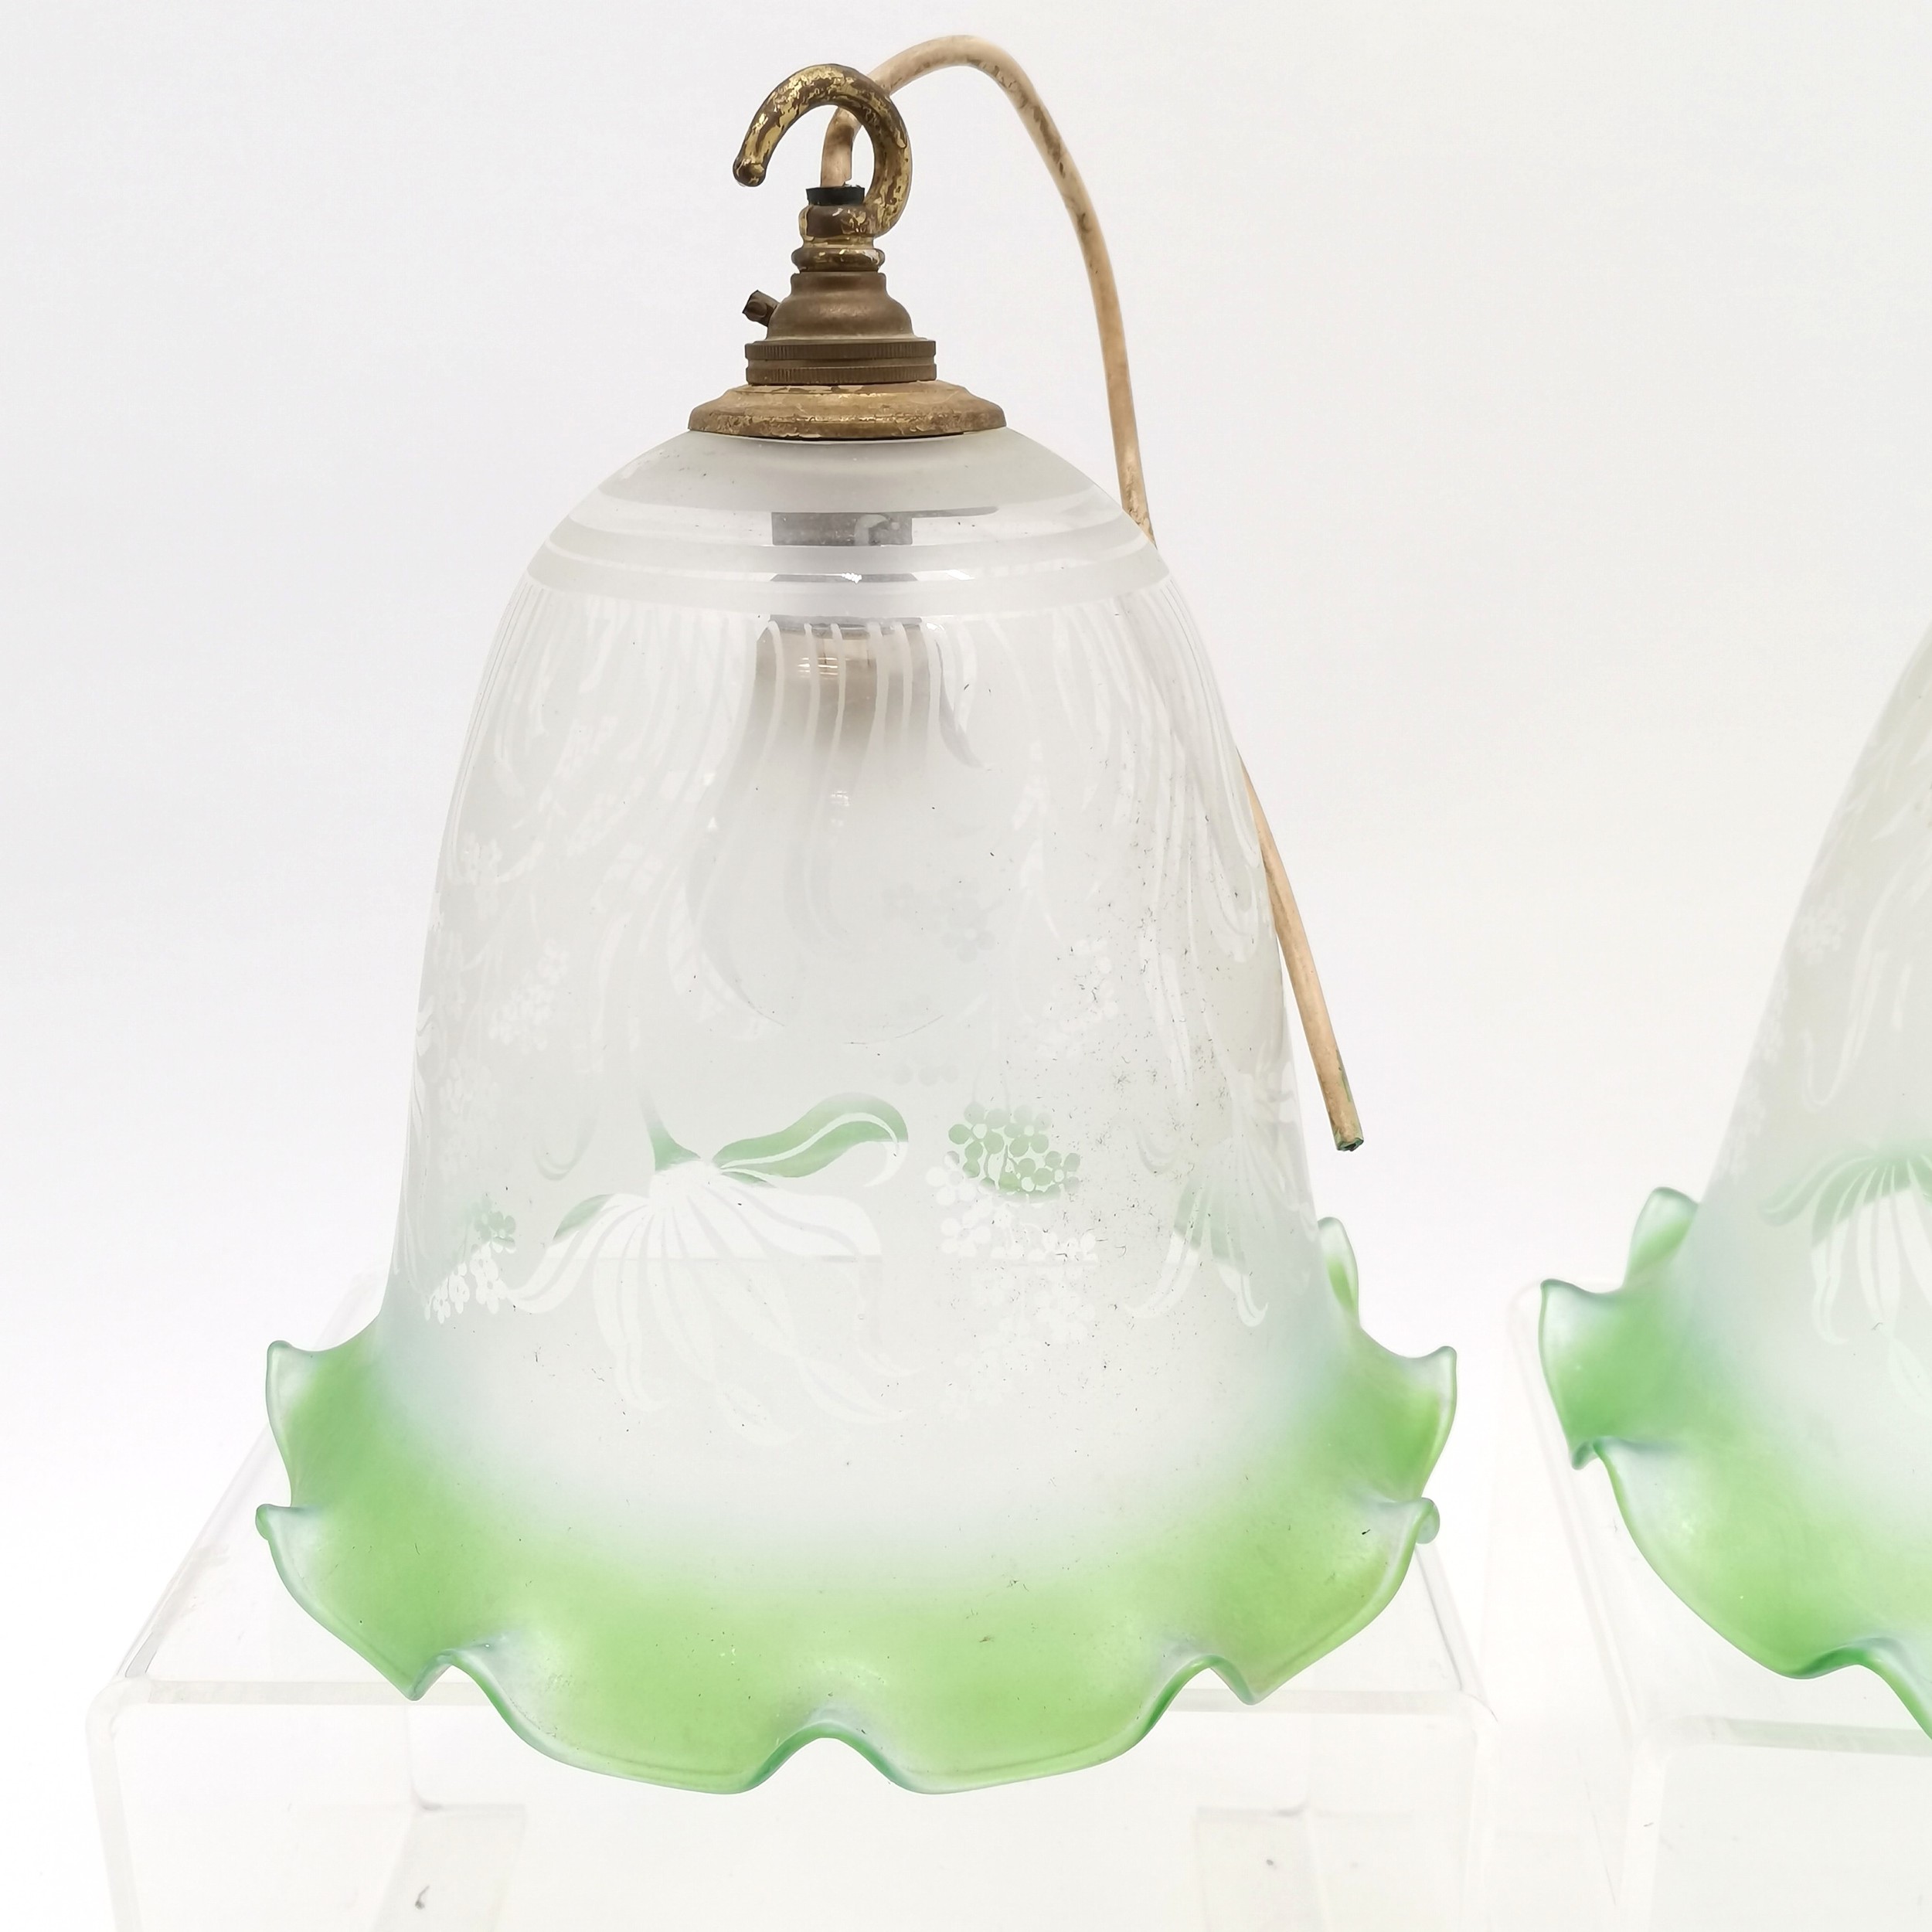 Pair of etched glass ceiling lights with green rim (26cm high) t/w 2 smaller etched glass ceiling - Image 3 of 4